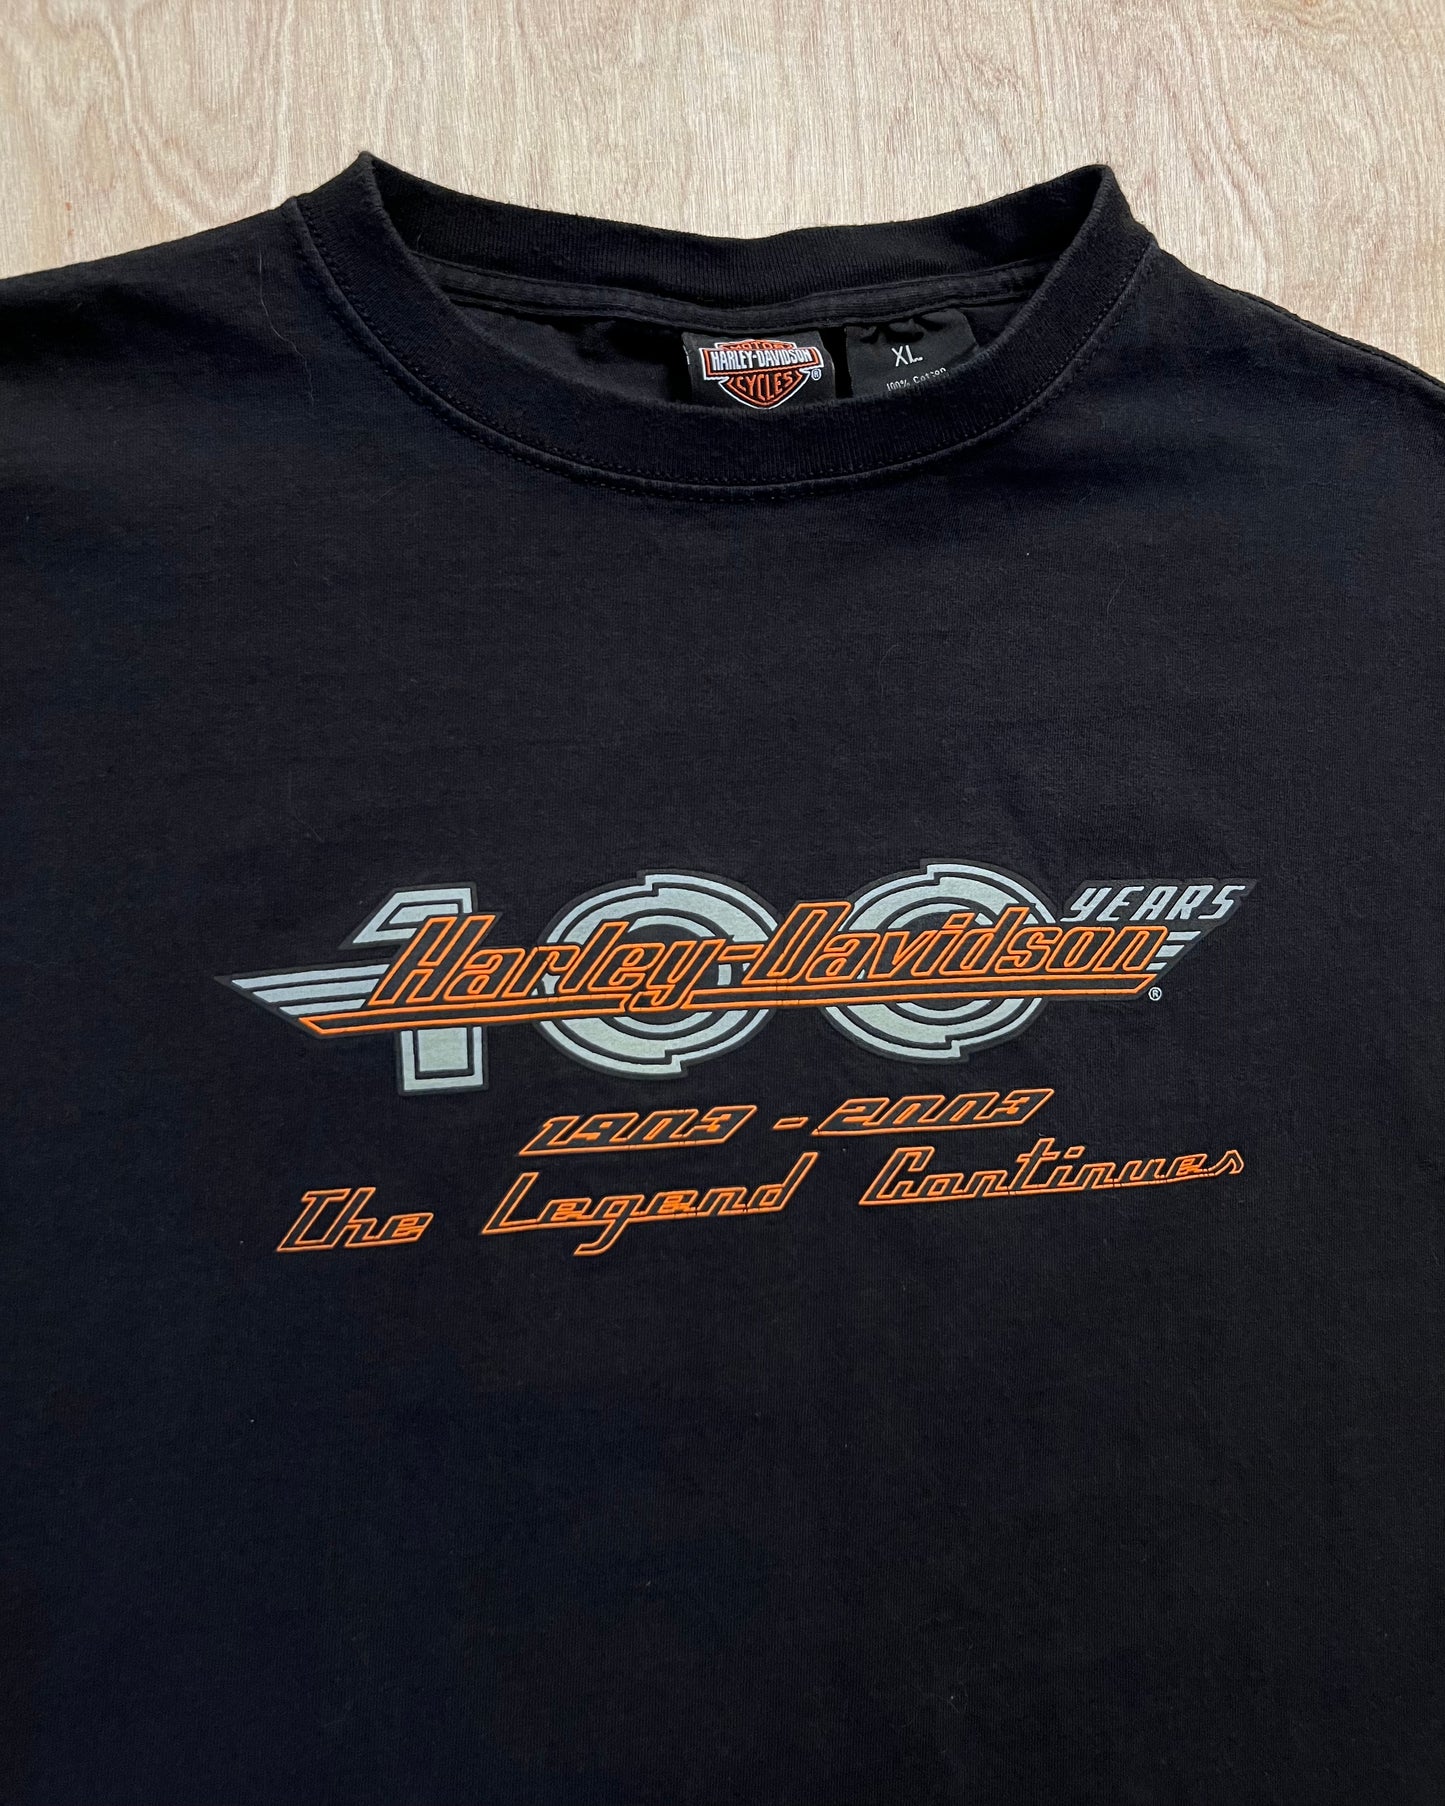 2003 Harley Davidson 100 Years "The Legend Continues" T-Shirt